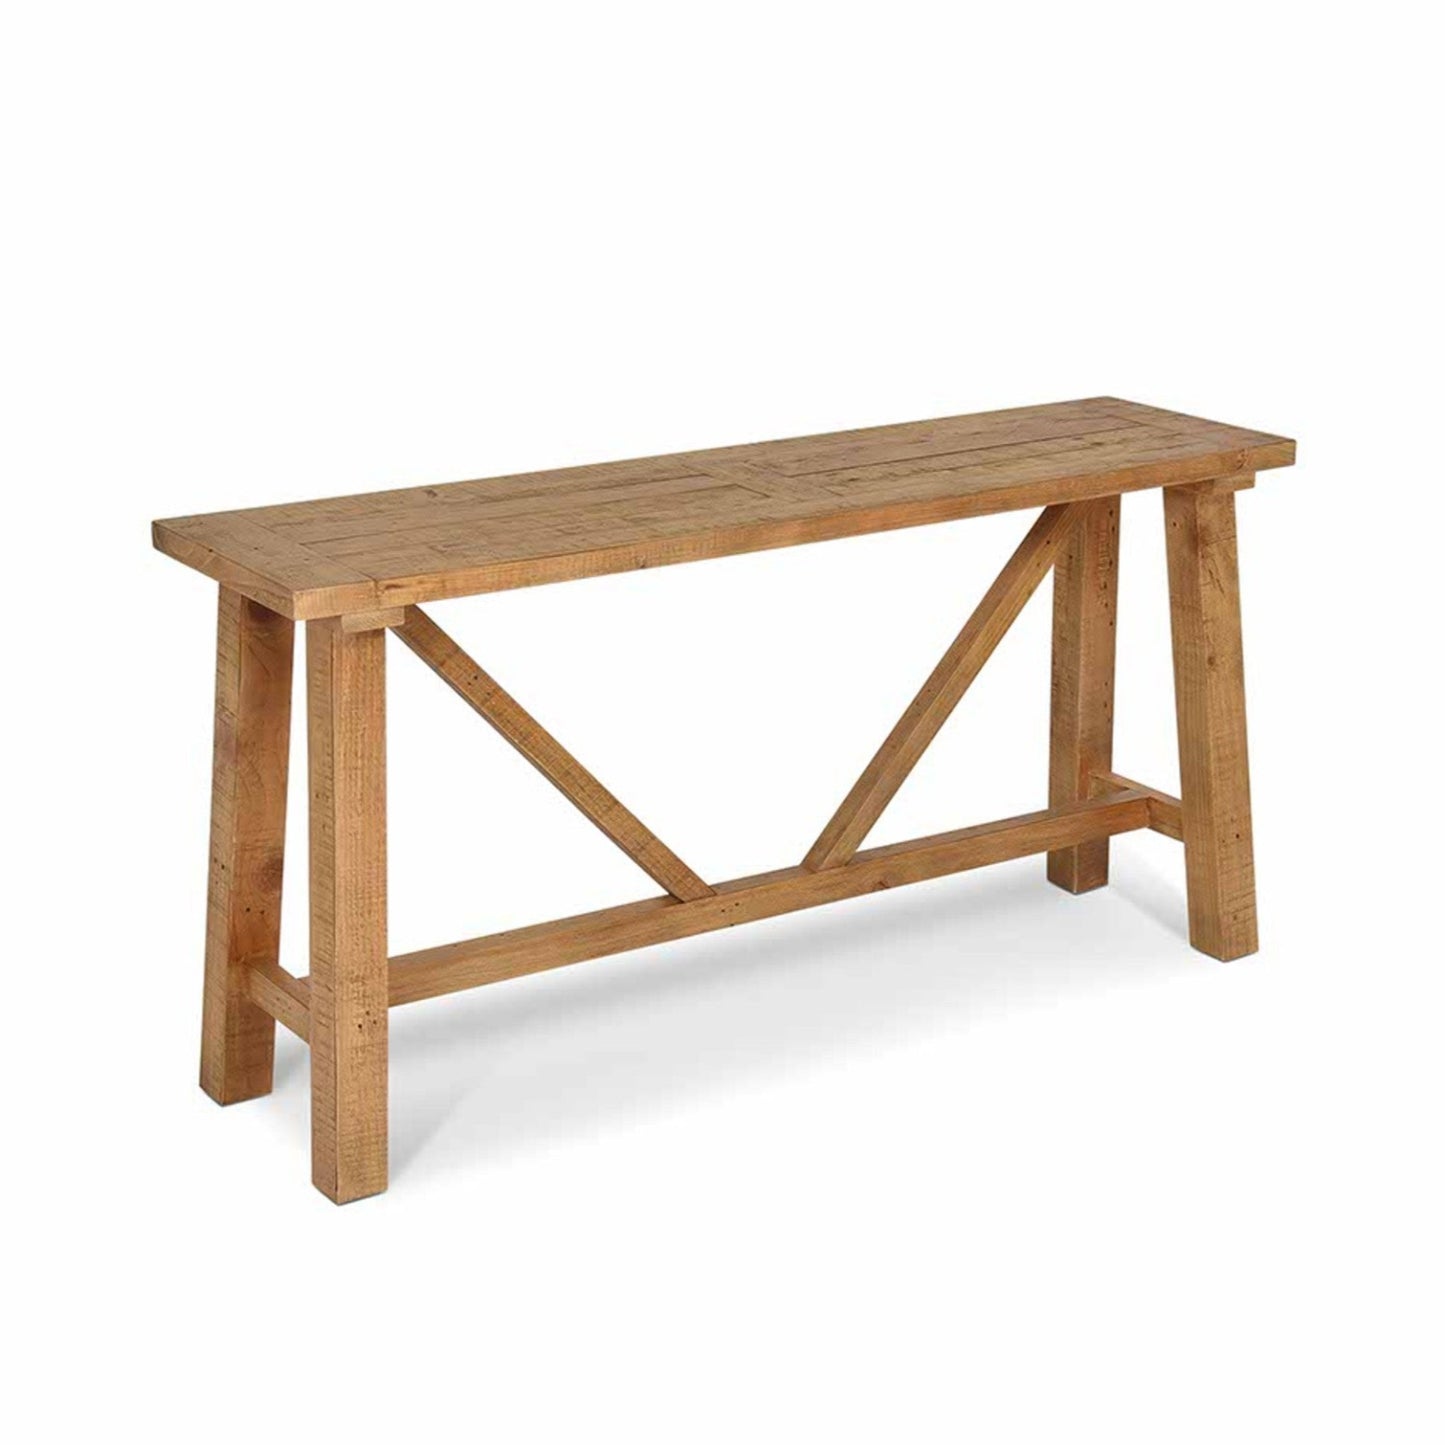 Ashwell Wooden Console Table